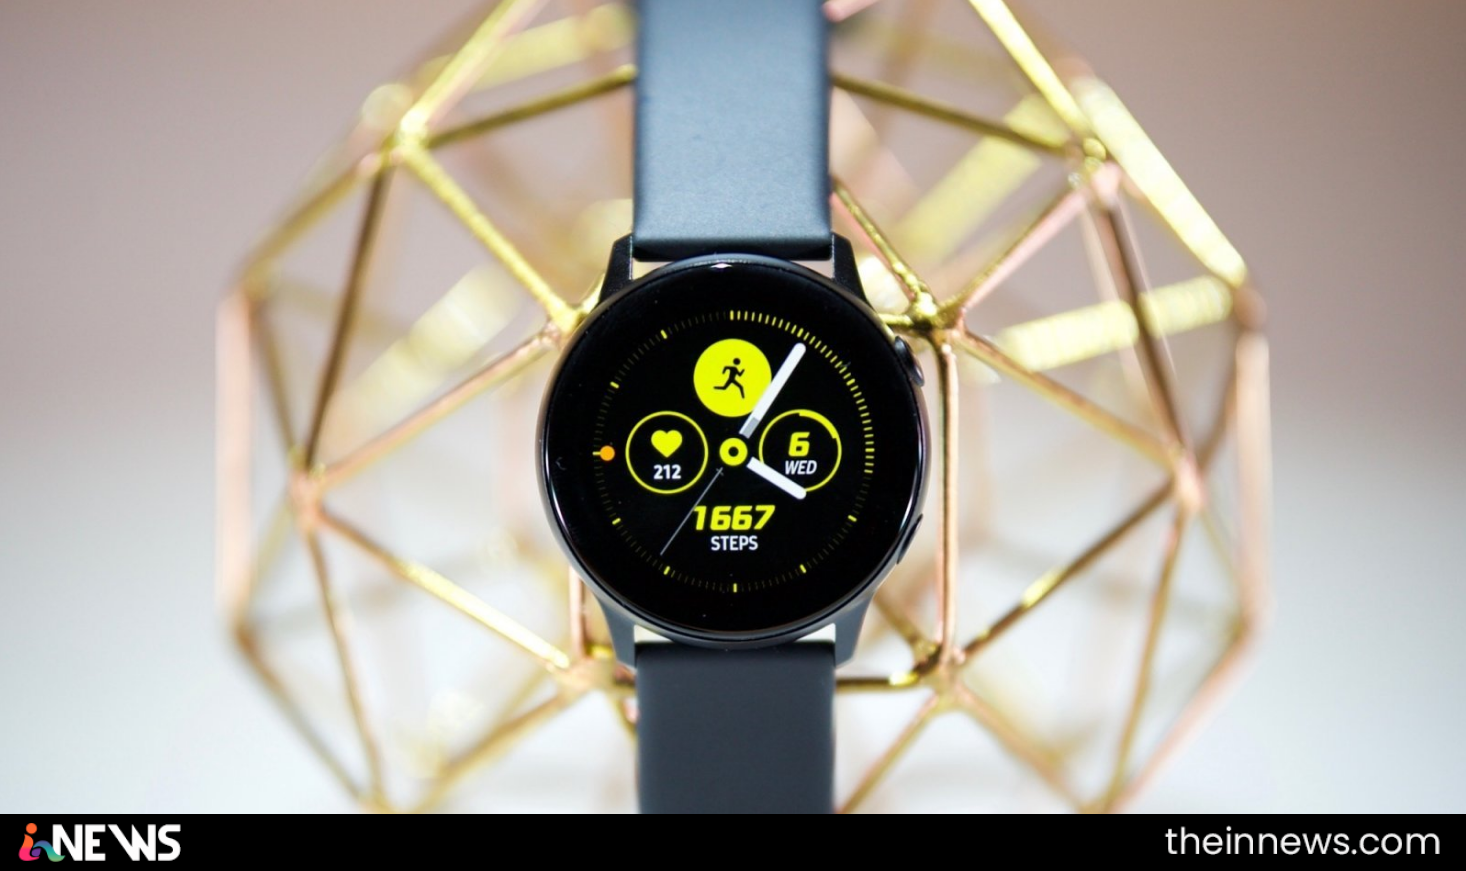 Galaxy Watch Active features